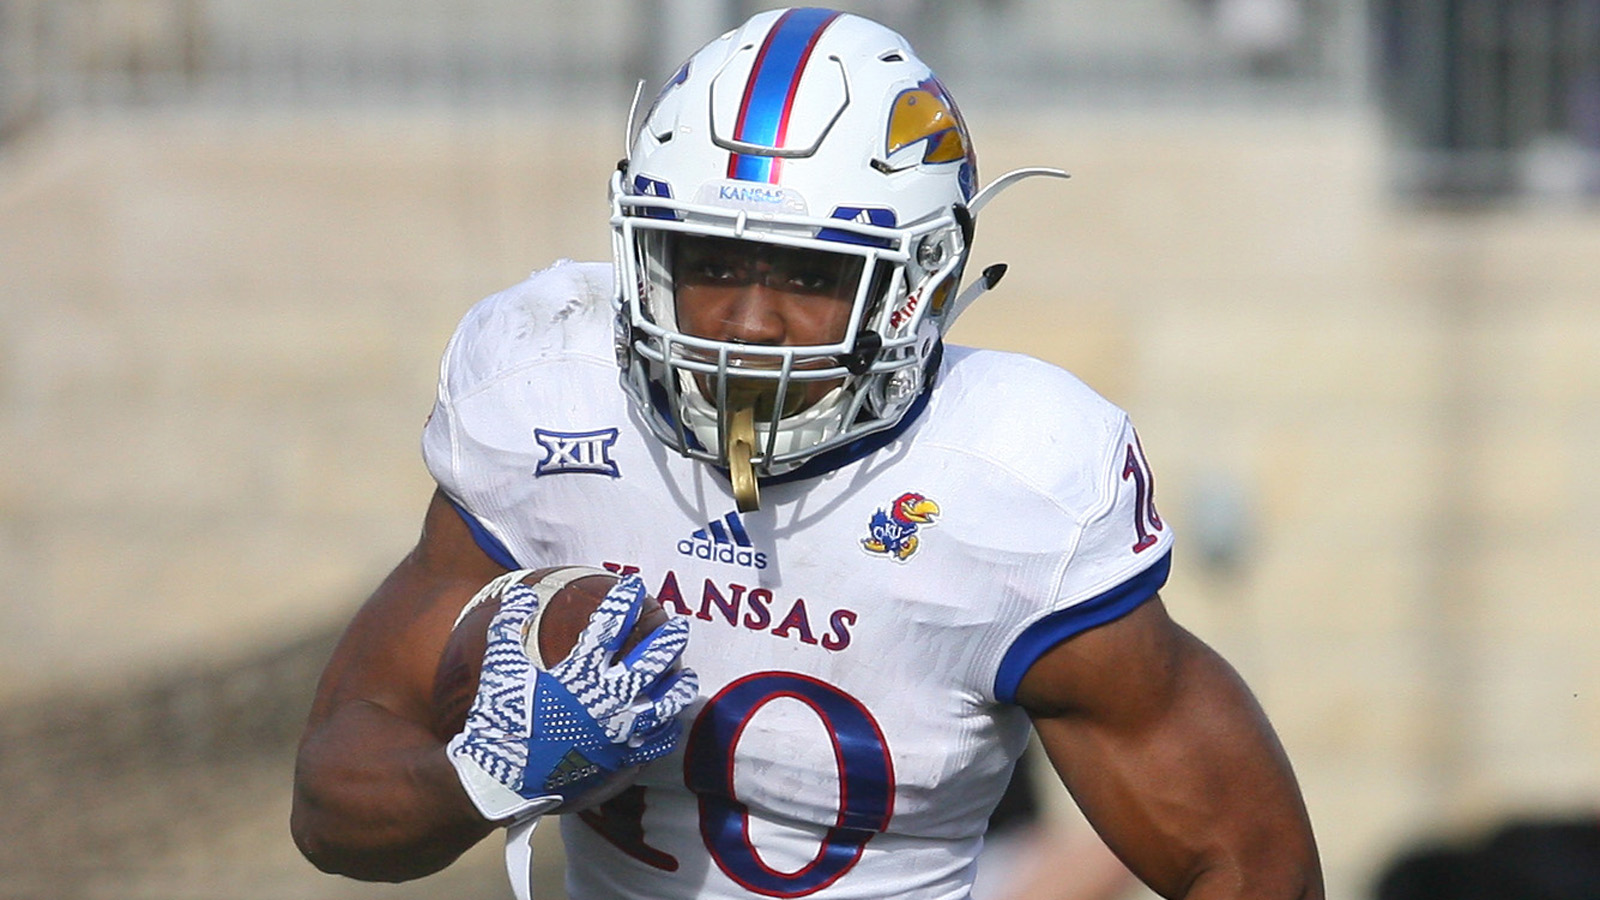 Jayhawks' road woes continue with 42-30 loss to Ohio